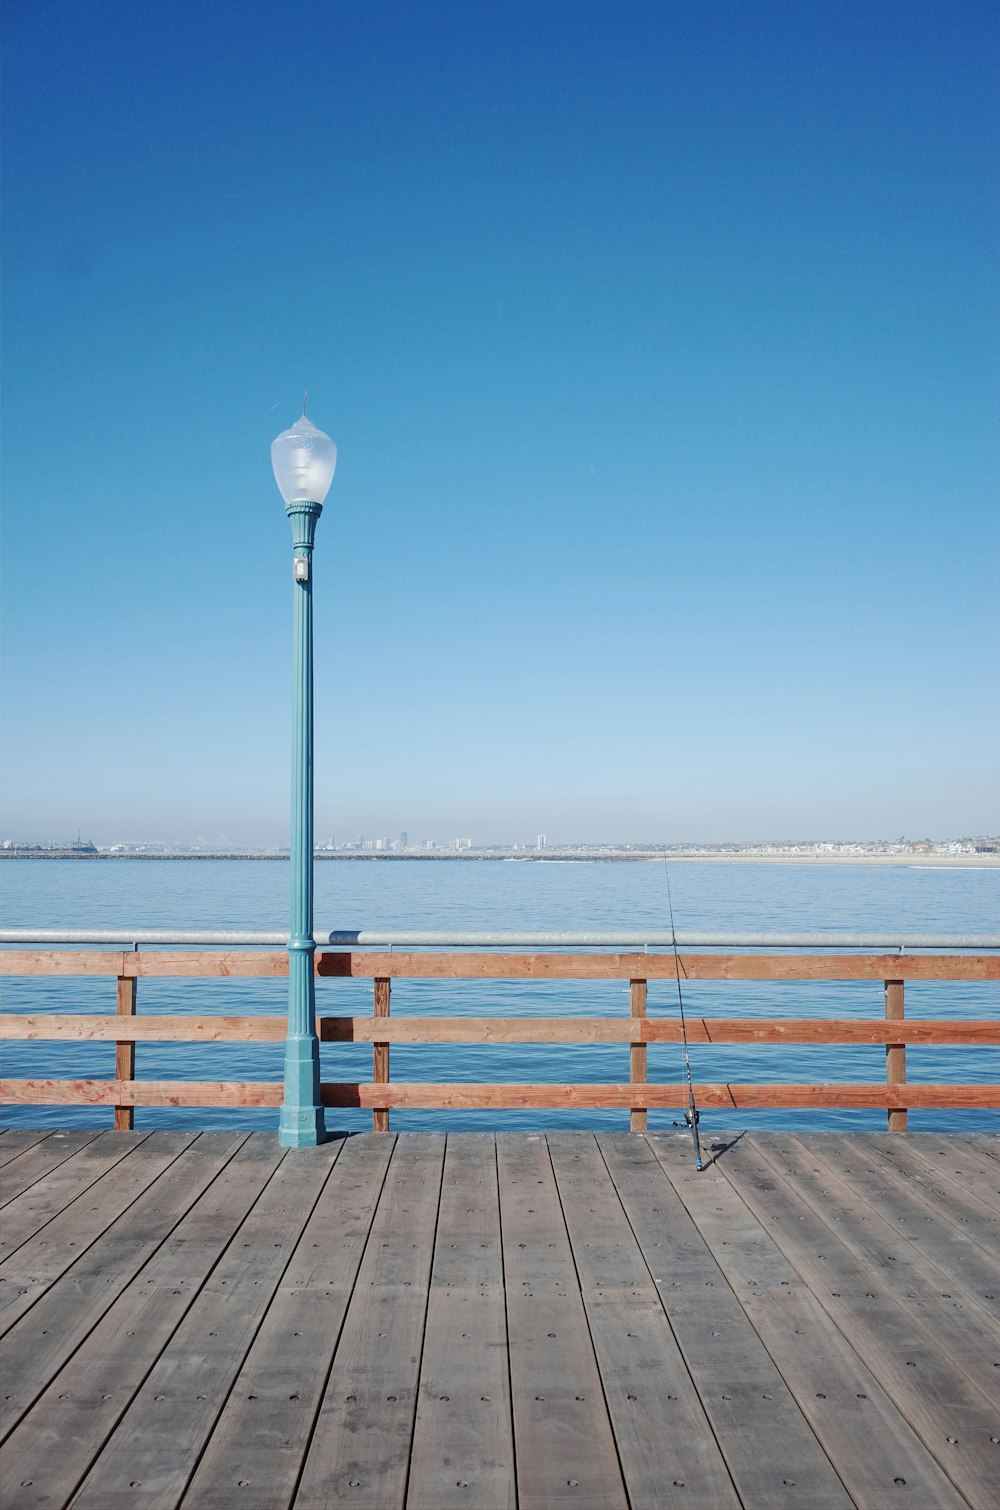 a light pole on a wooden pier next to the ocean